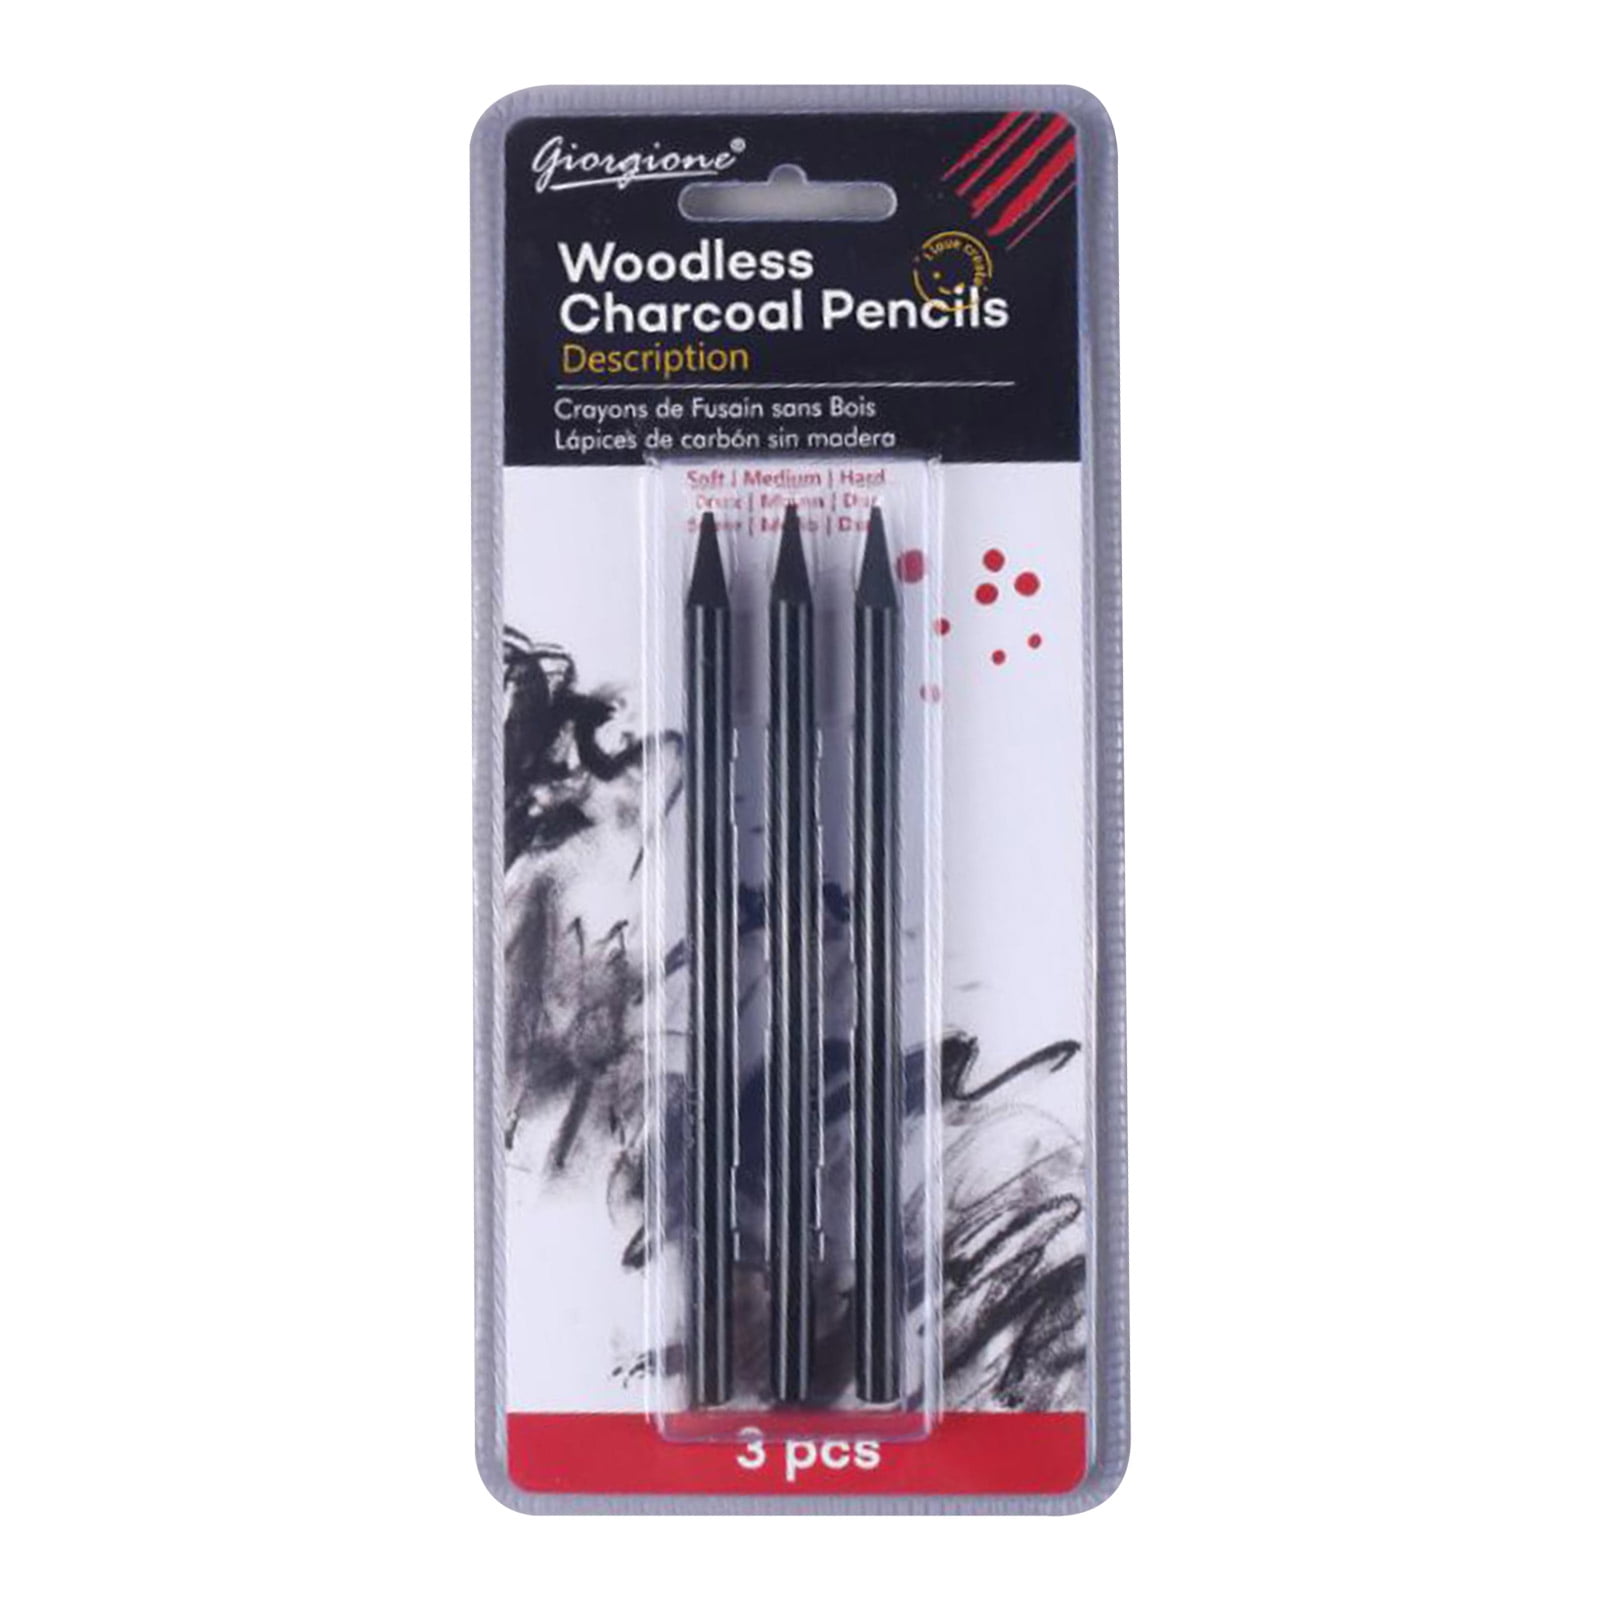  6pcs Woodless Pencil Set - Graphite Pencil HB 2B 4B 6B 8B EE  for Drawing, Writing, Shading, Coloring, Soft Pencil No Wood, Gift for  Artist, Hobbyist,Beginner